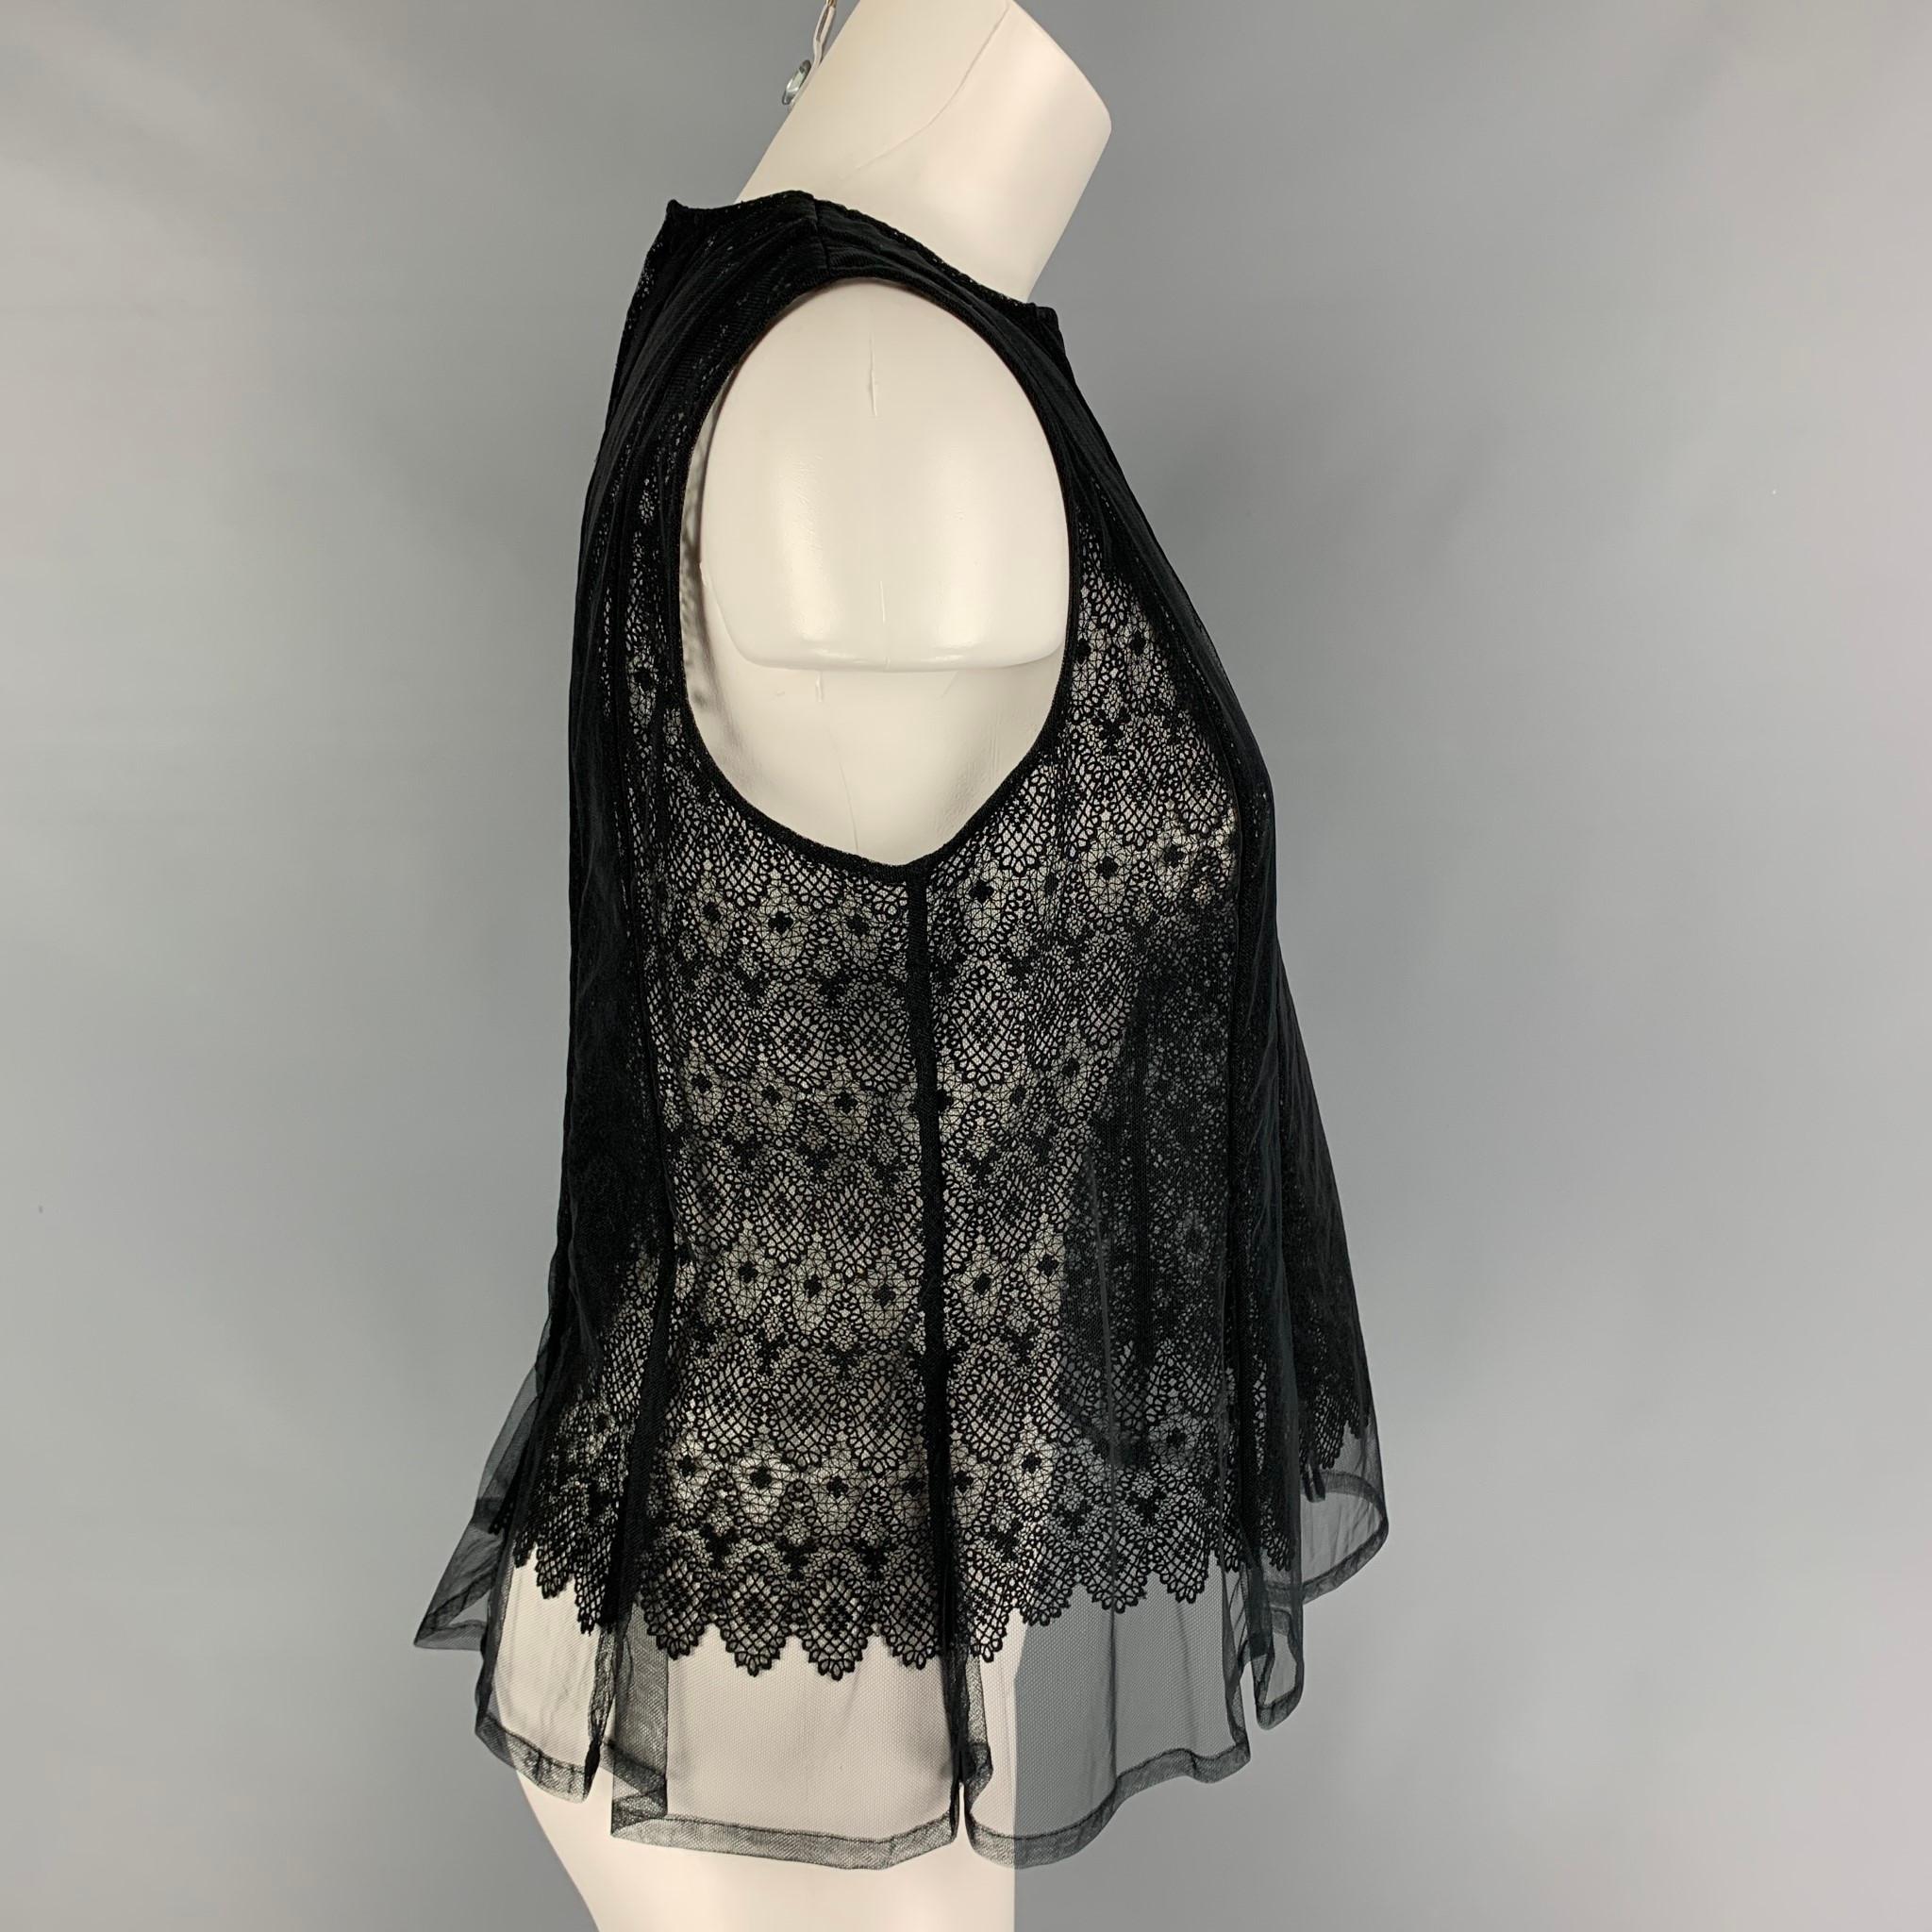 NOIR KEI NINOMIYA top comes in a black lace tulle material featuring a overlay design, sleeveless, and a back zip up closure. 

Excellent Pre-Owned Condition.
Marked: M

Measurements:

Shoulder: 14 in.
Bust: 32 in.
Length: 22 in.